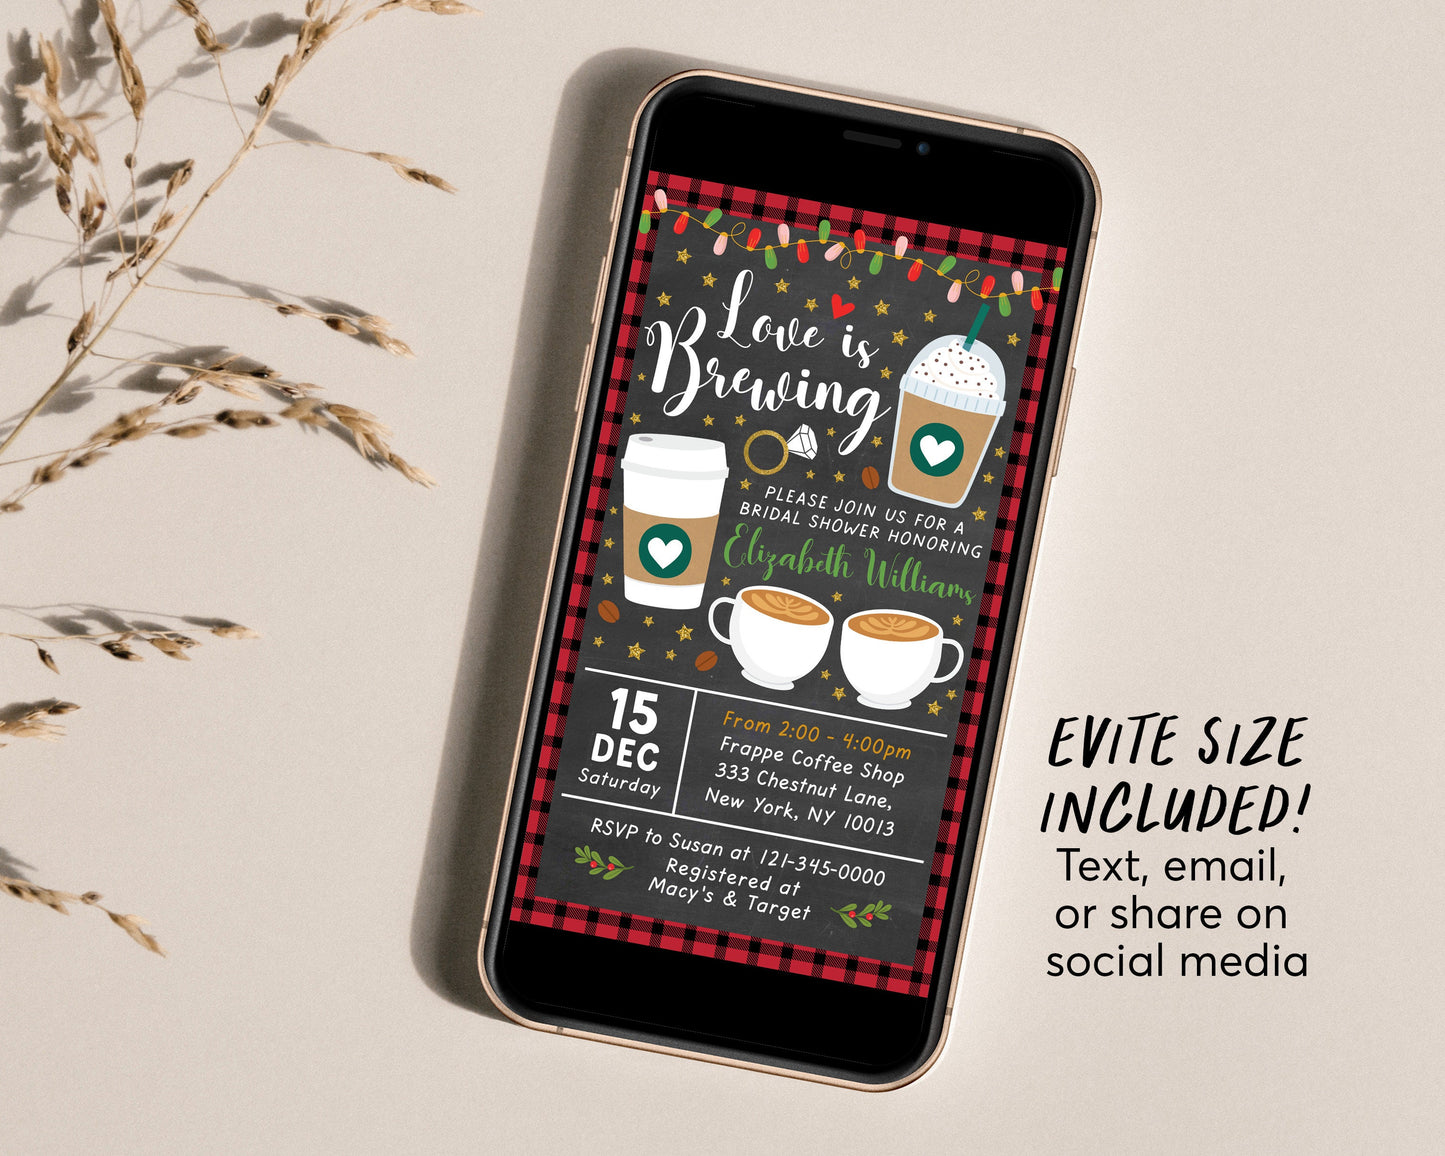 Christmas Bridal Shower Invitation Editable Template, Love is Brewing Bridal Brunch Breakfast Coffee Themed Invite, Holiday Engagement Party